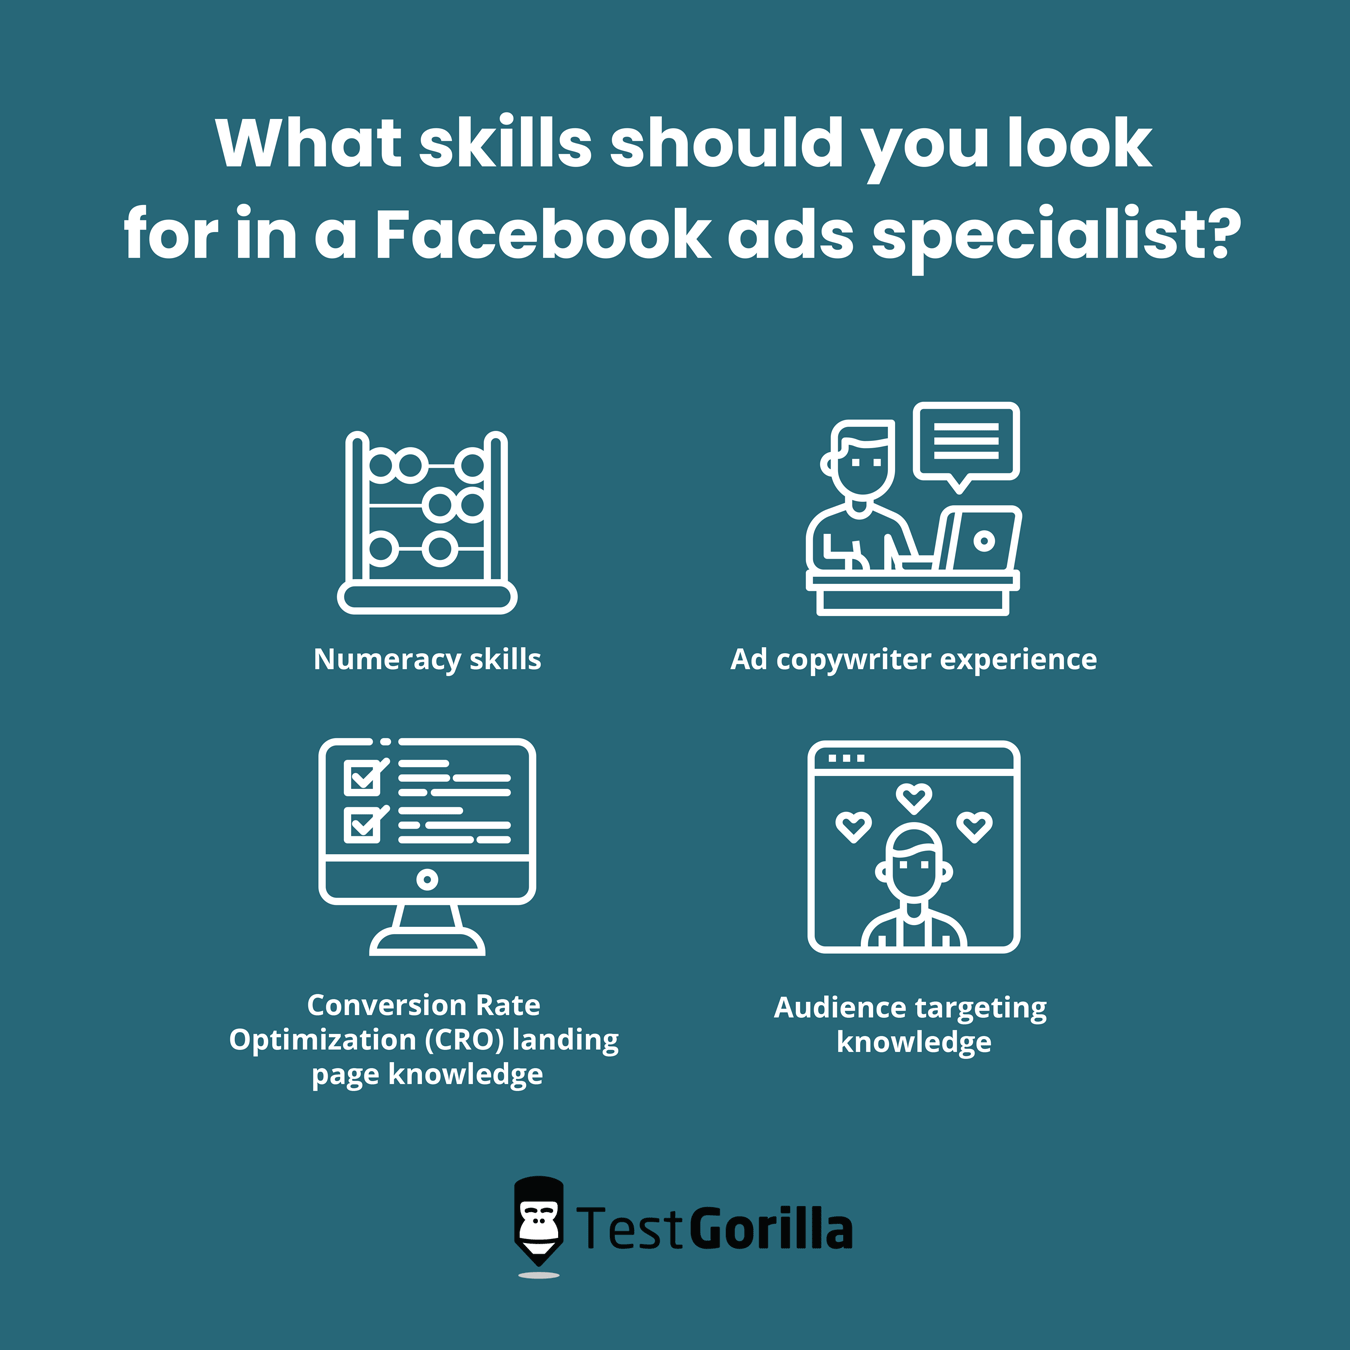 skills should you look for in a Facebook ads specialist